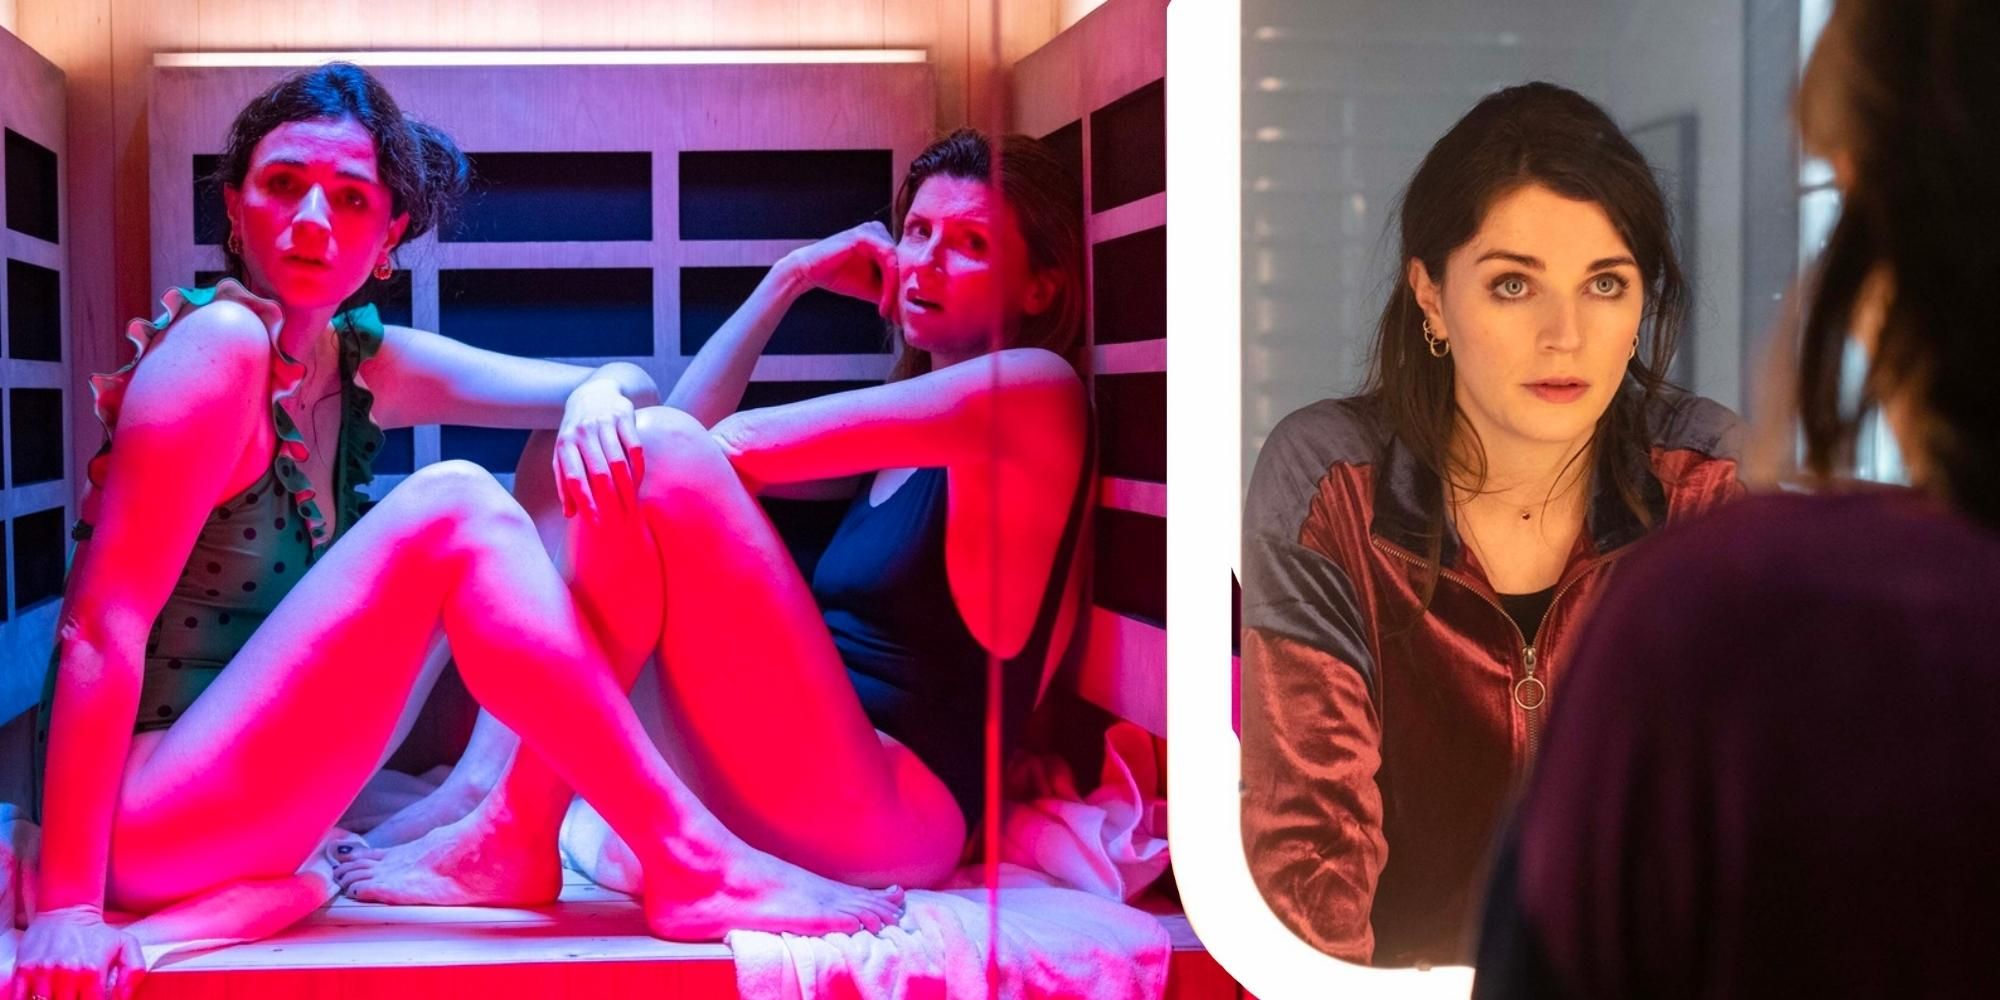 Aisling Bea and Sharon Horgan in sauna, Bea looking in a mirror in This Way Up